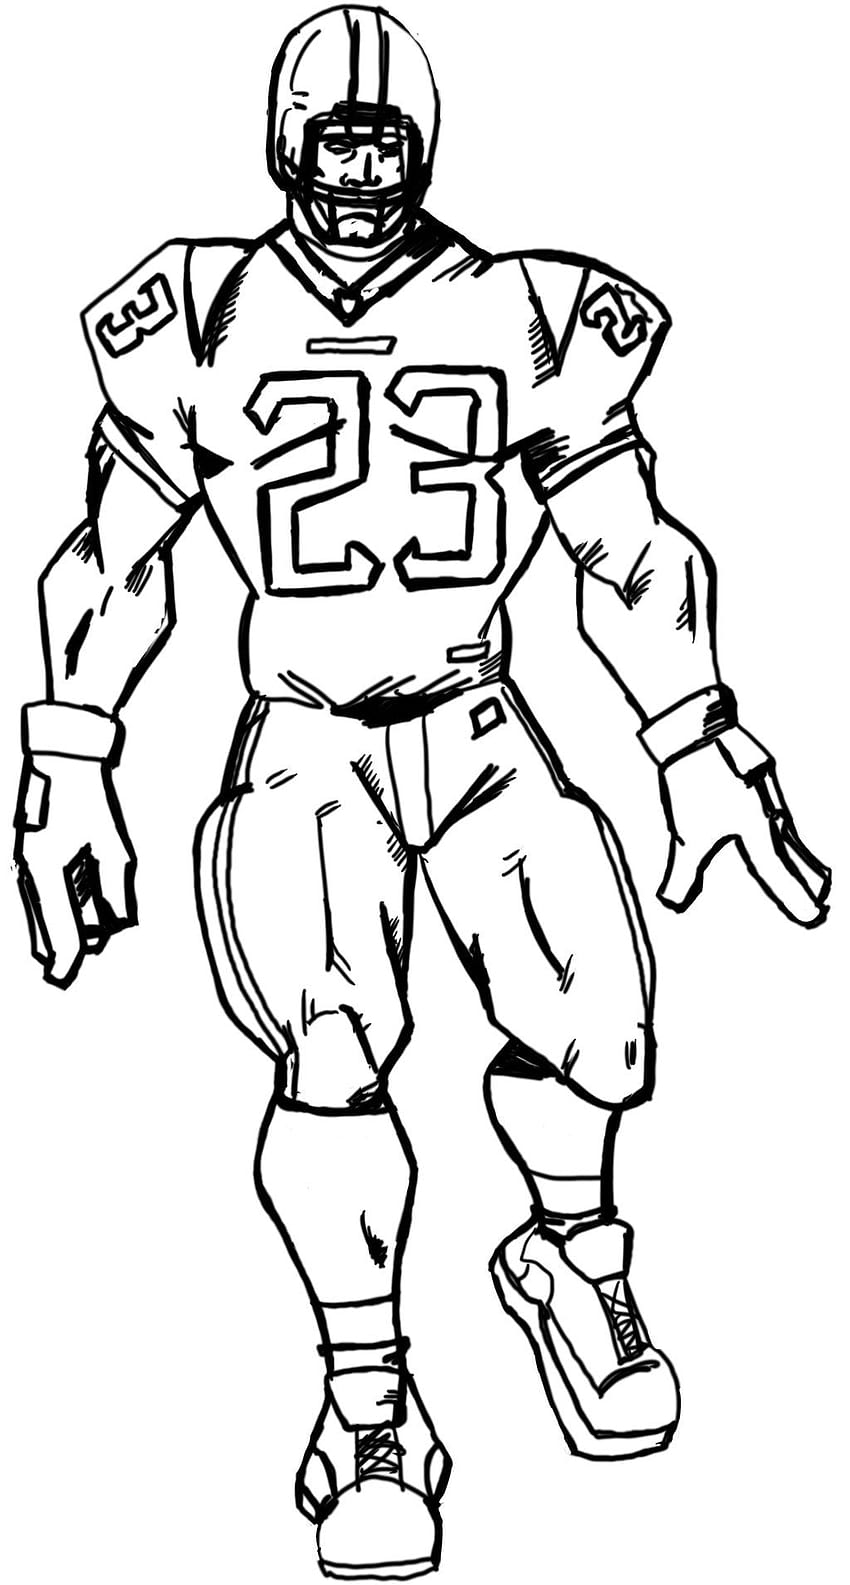 How To Draw A Football Player Easy Step By Step - YouTube